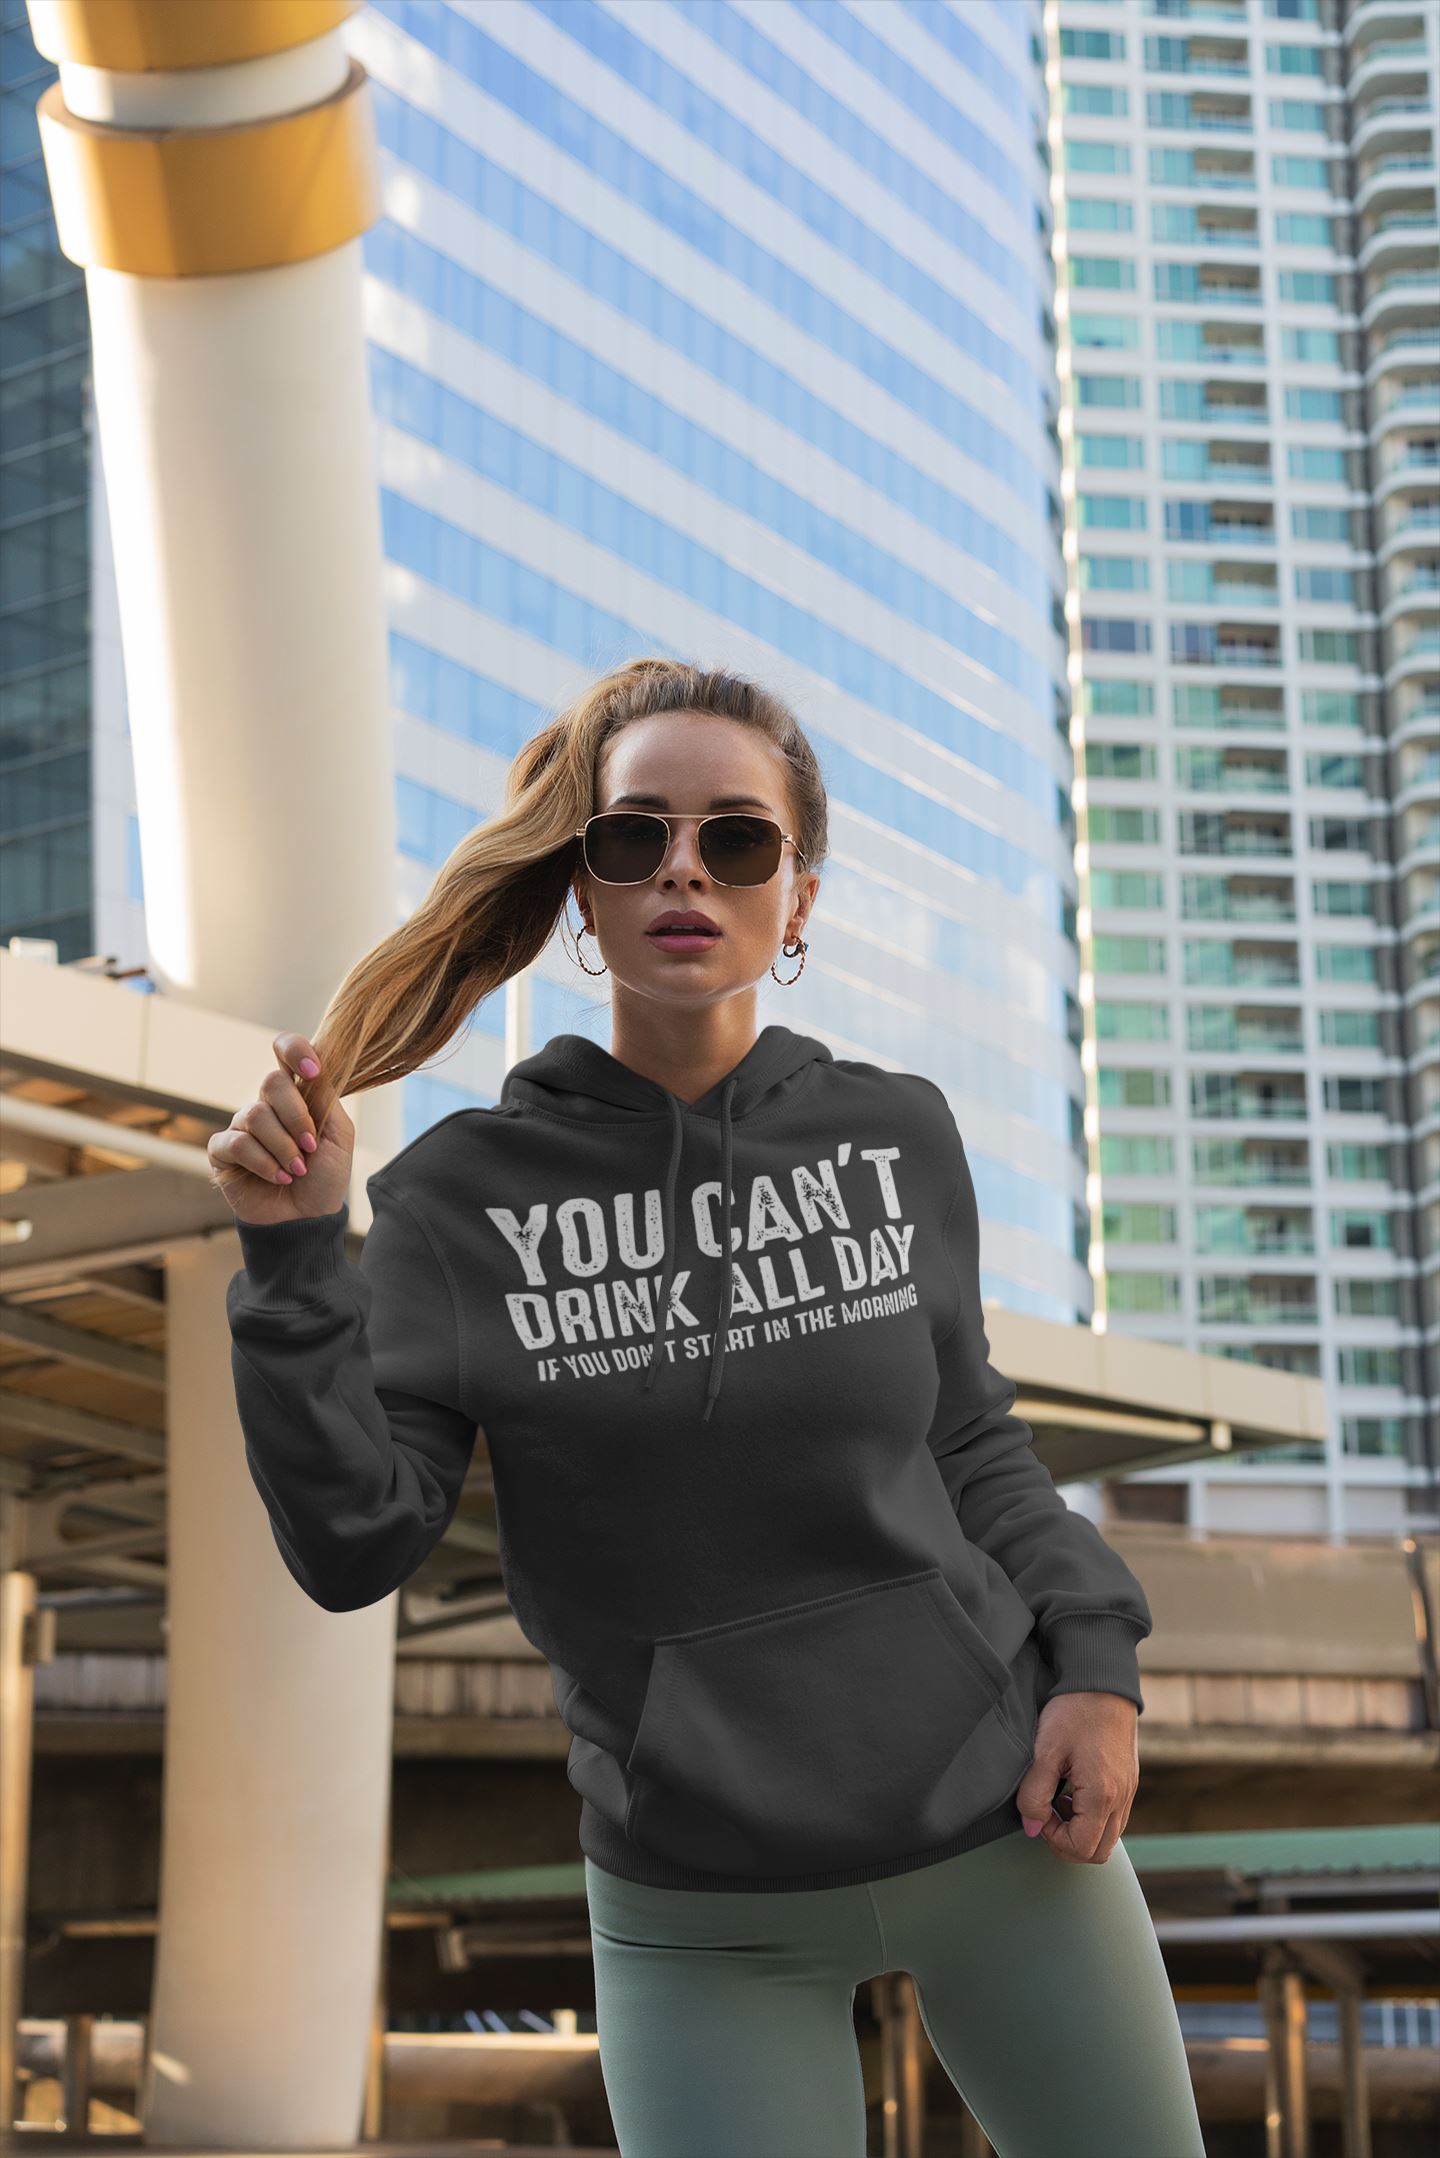 You Can't Drink All day If You Don't Start in the Morning Funny Black Hoodie for Men and Women freeshipping - Catch My Drift India